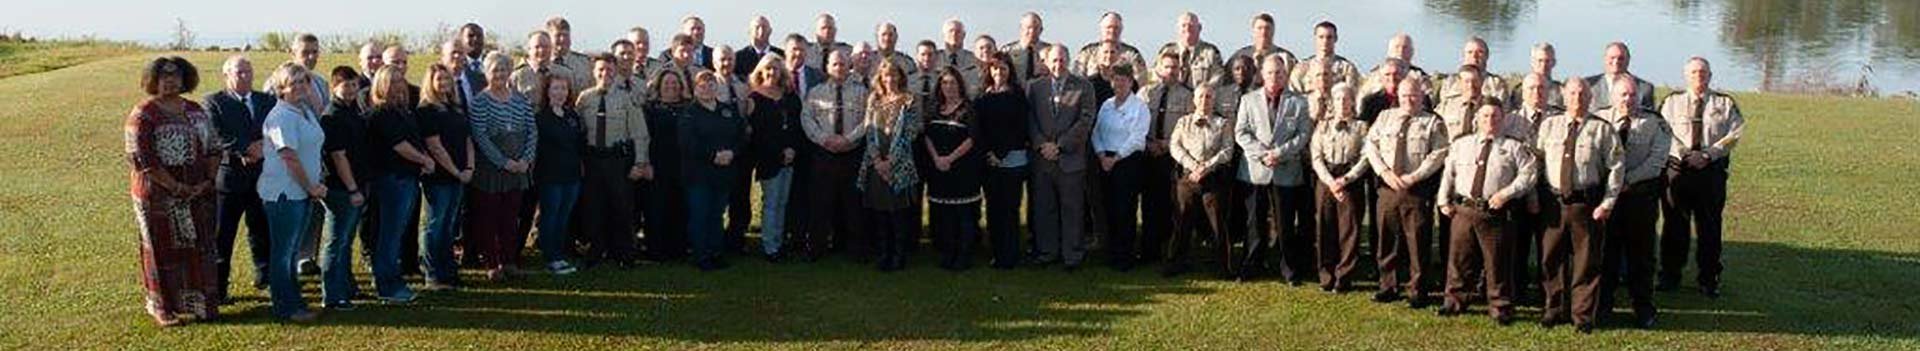 St. Clair County Sheriff’s Office staff in work uniforms standing in the grass in front of the lake